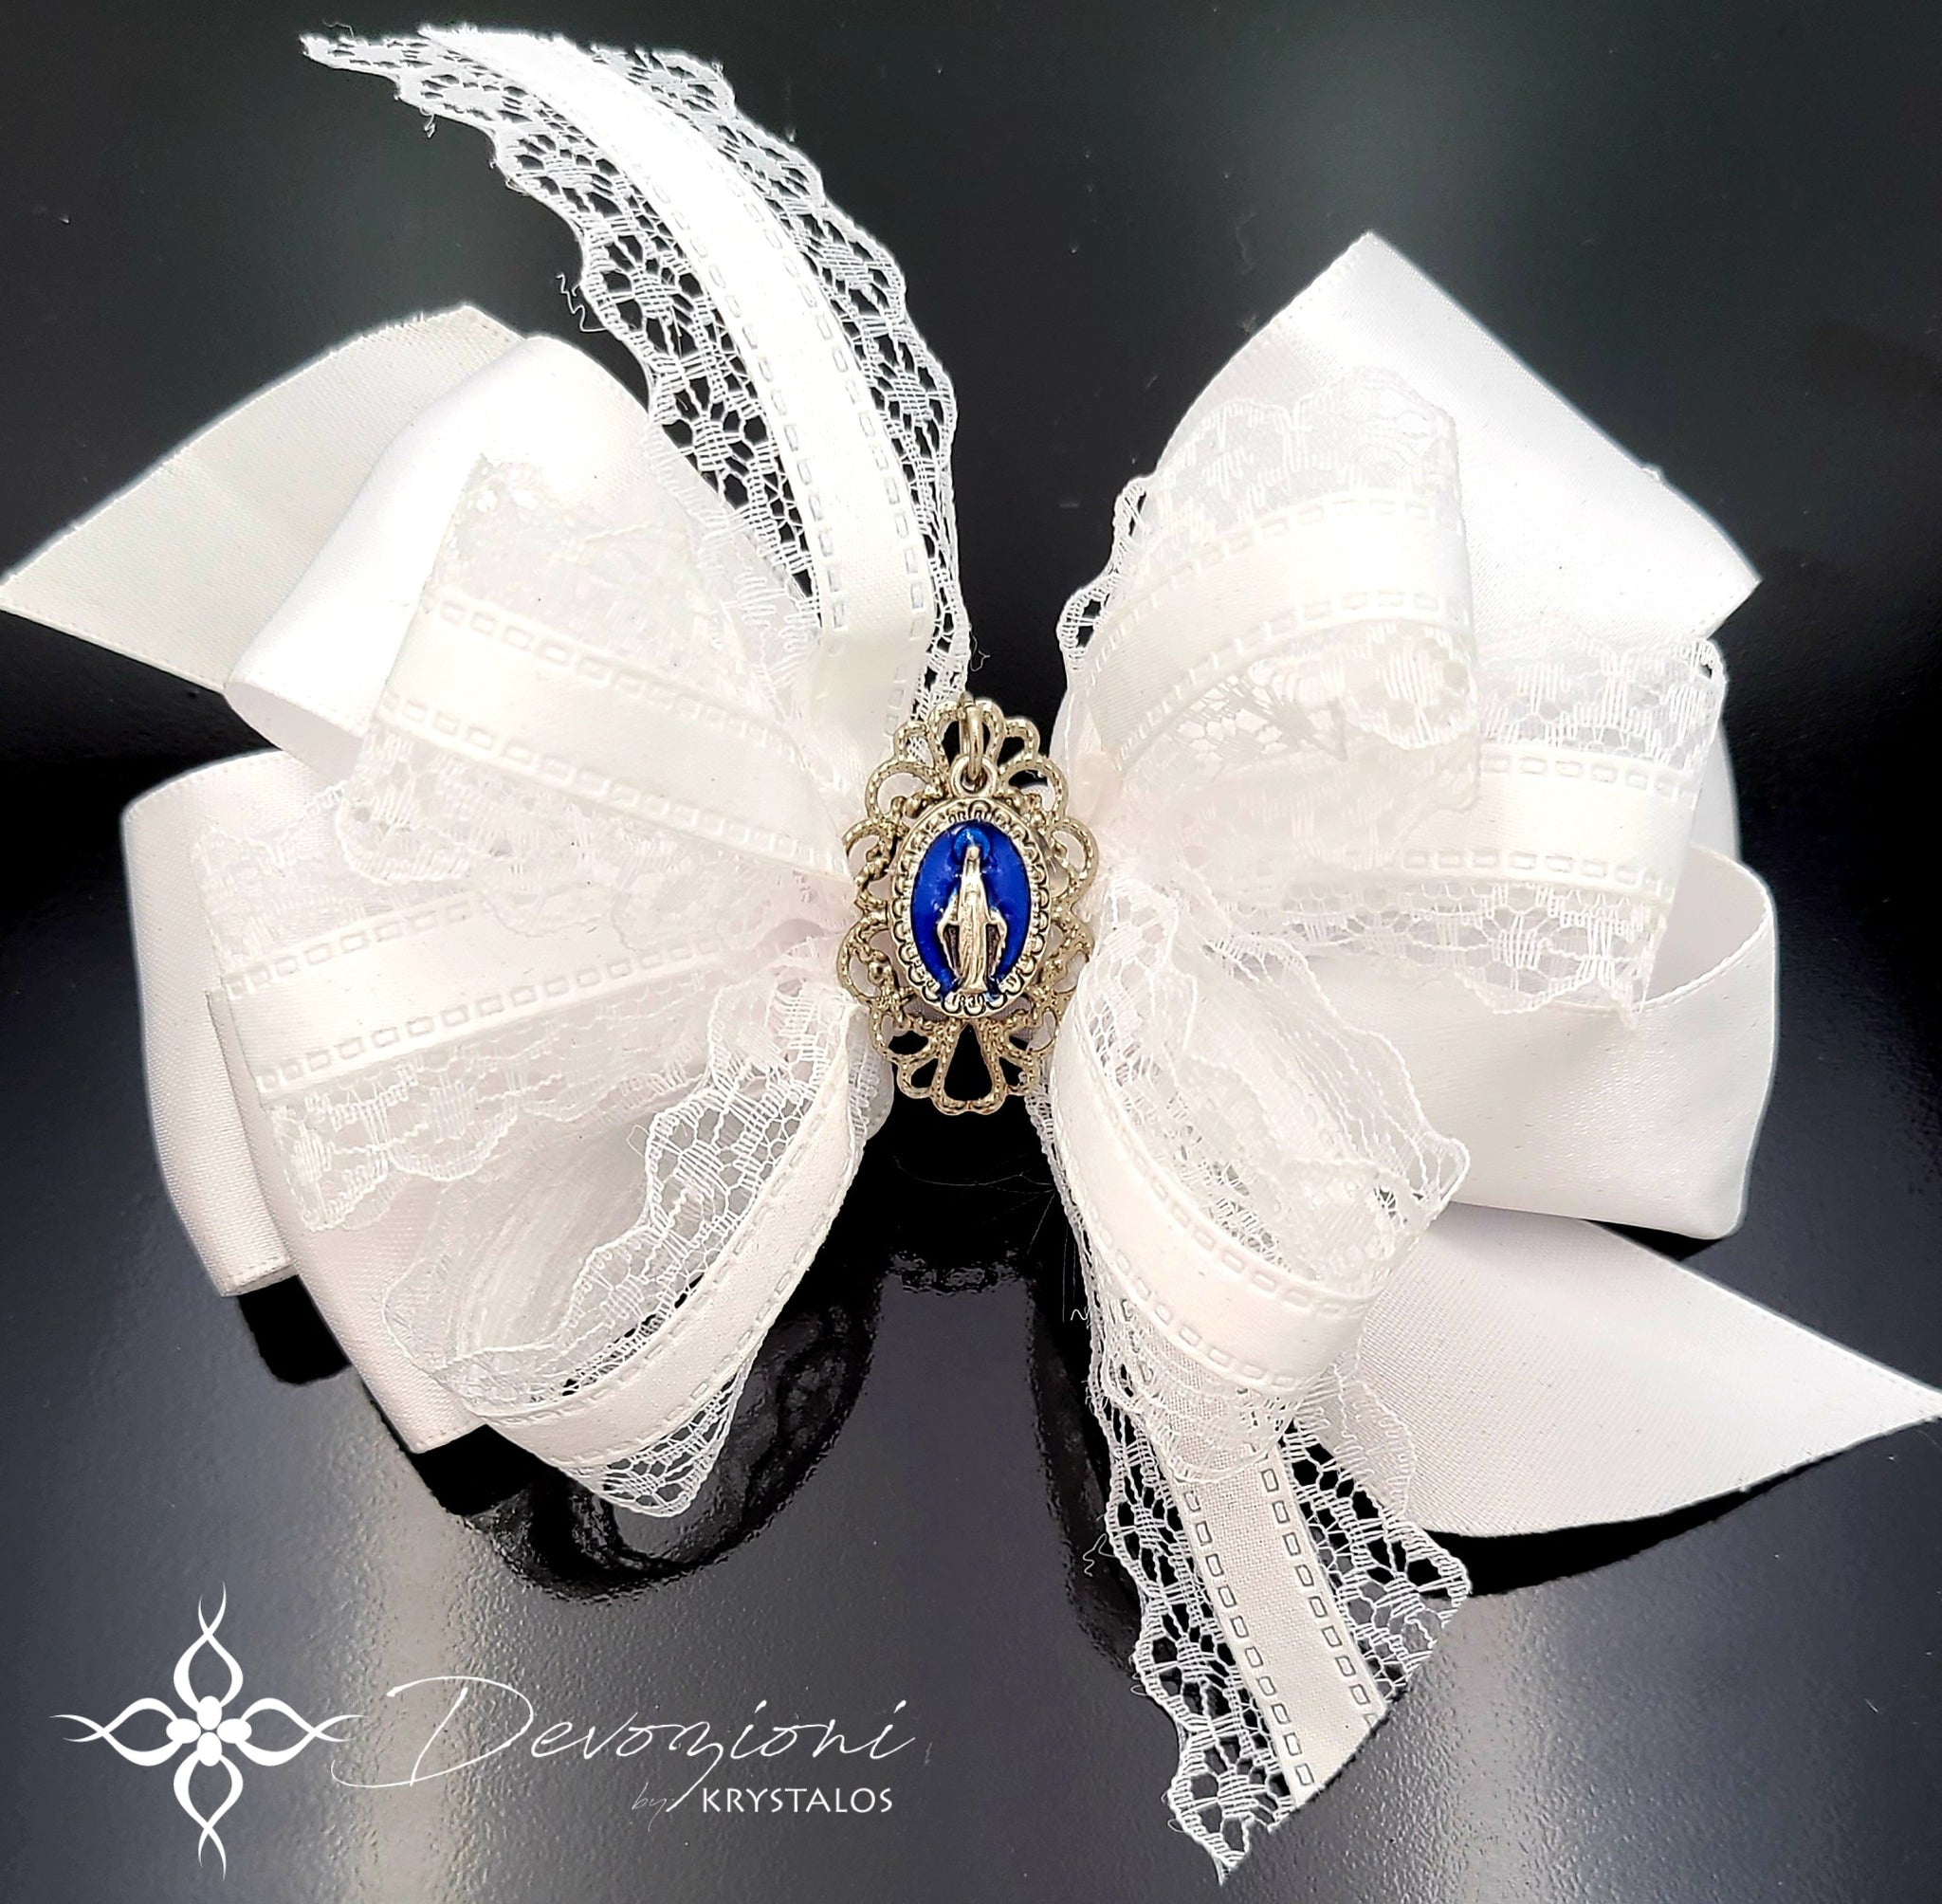 Virgin Mary (Miraculous Medal) Bow for Girls in White Satin and Lace - Floreli + Devozioni